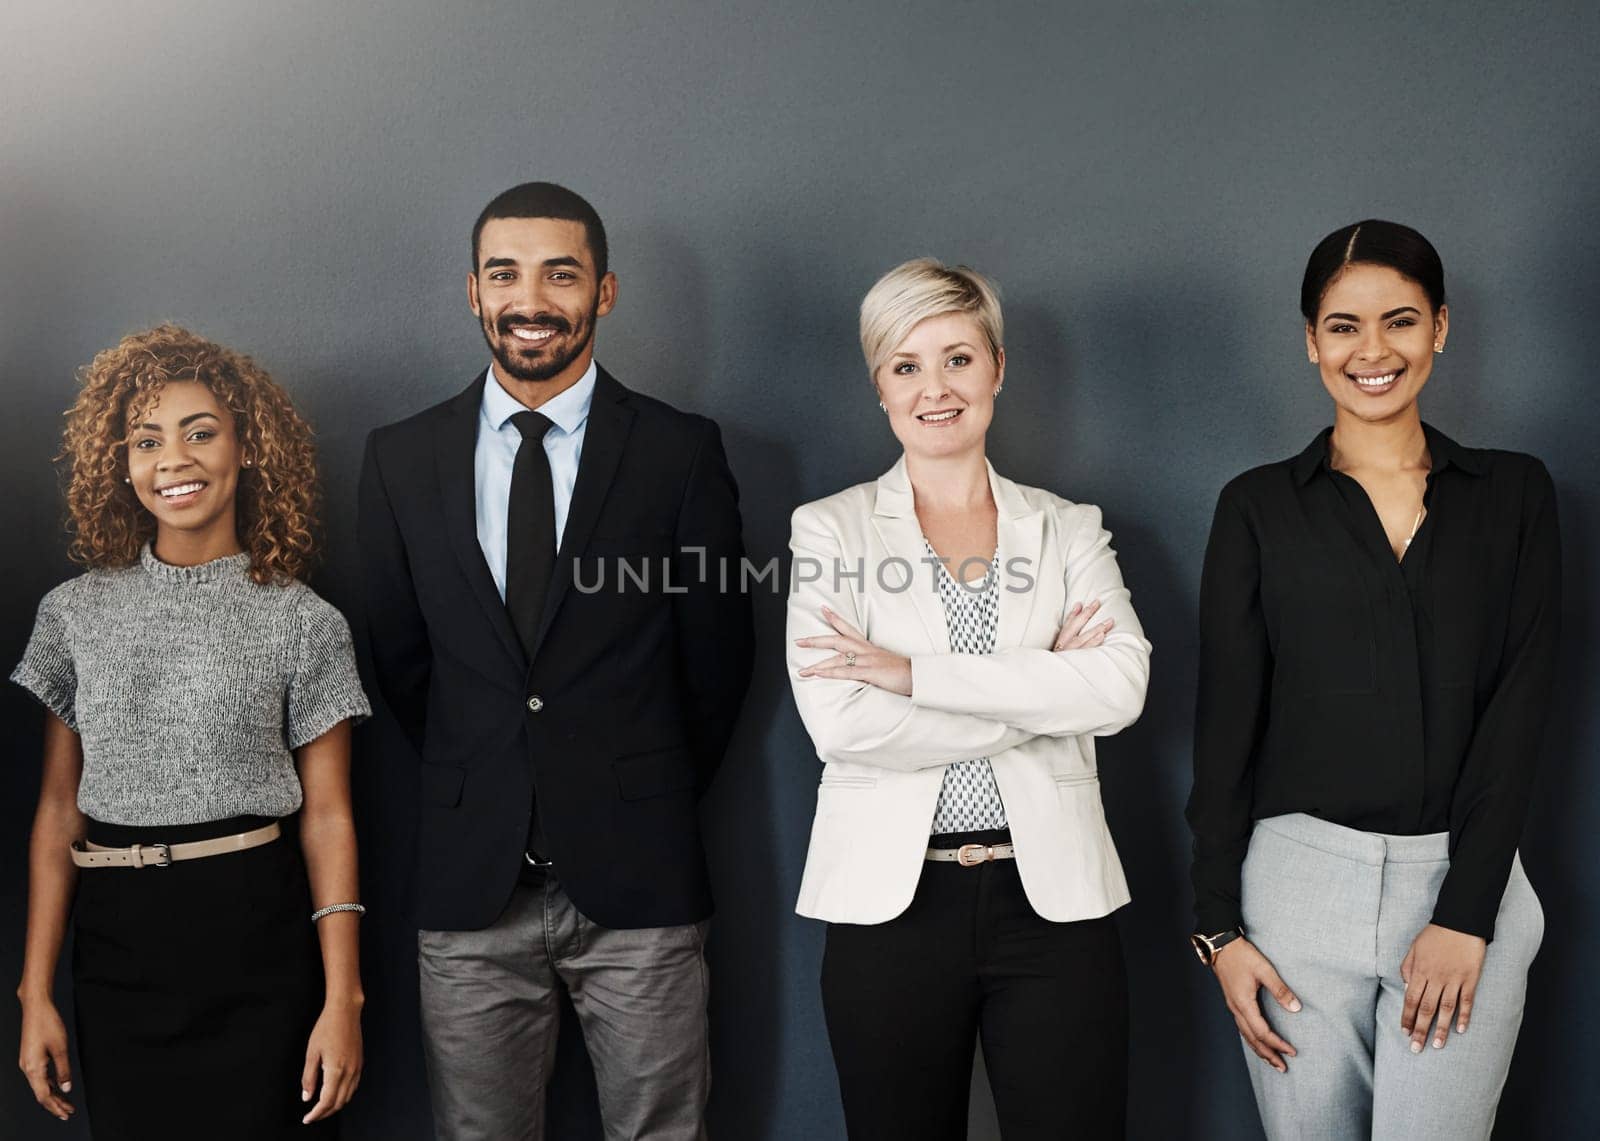 Diversity, support and portrait of business people in studio for smile, community and teamwork. Happy, collaboration and professional with employees and wall background for confidence and mission by YuriArcurs